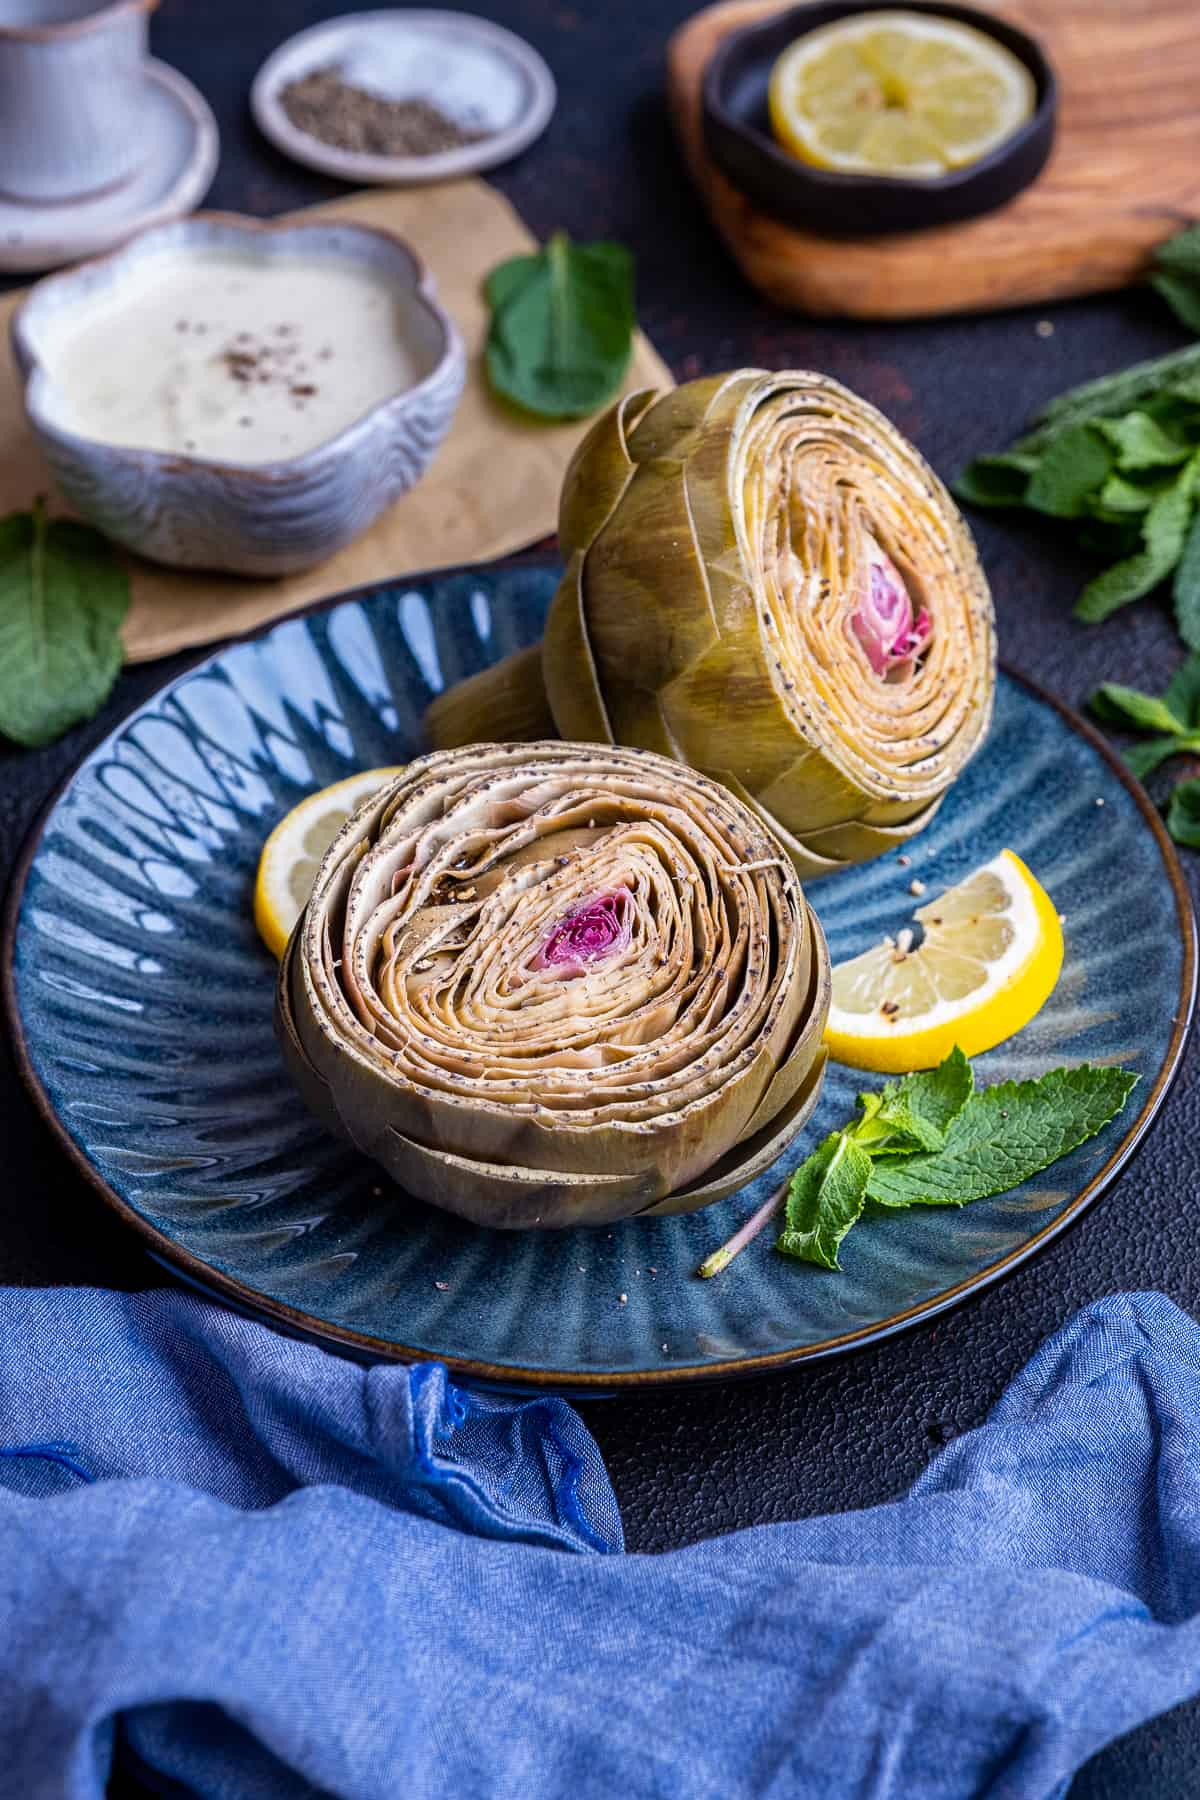 Steamed artichokes garnished with lemon slices and fresh mint leaves on a dark blue plate photographed from front view.